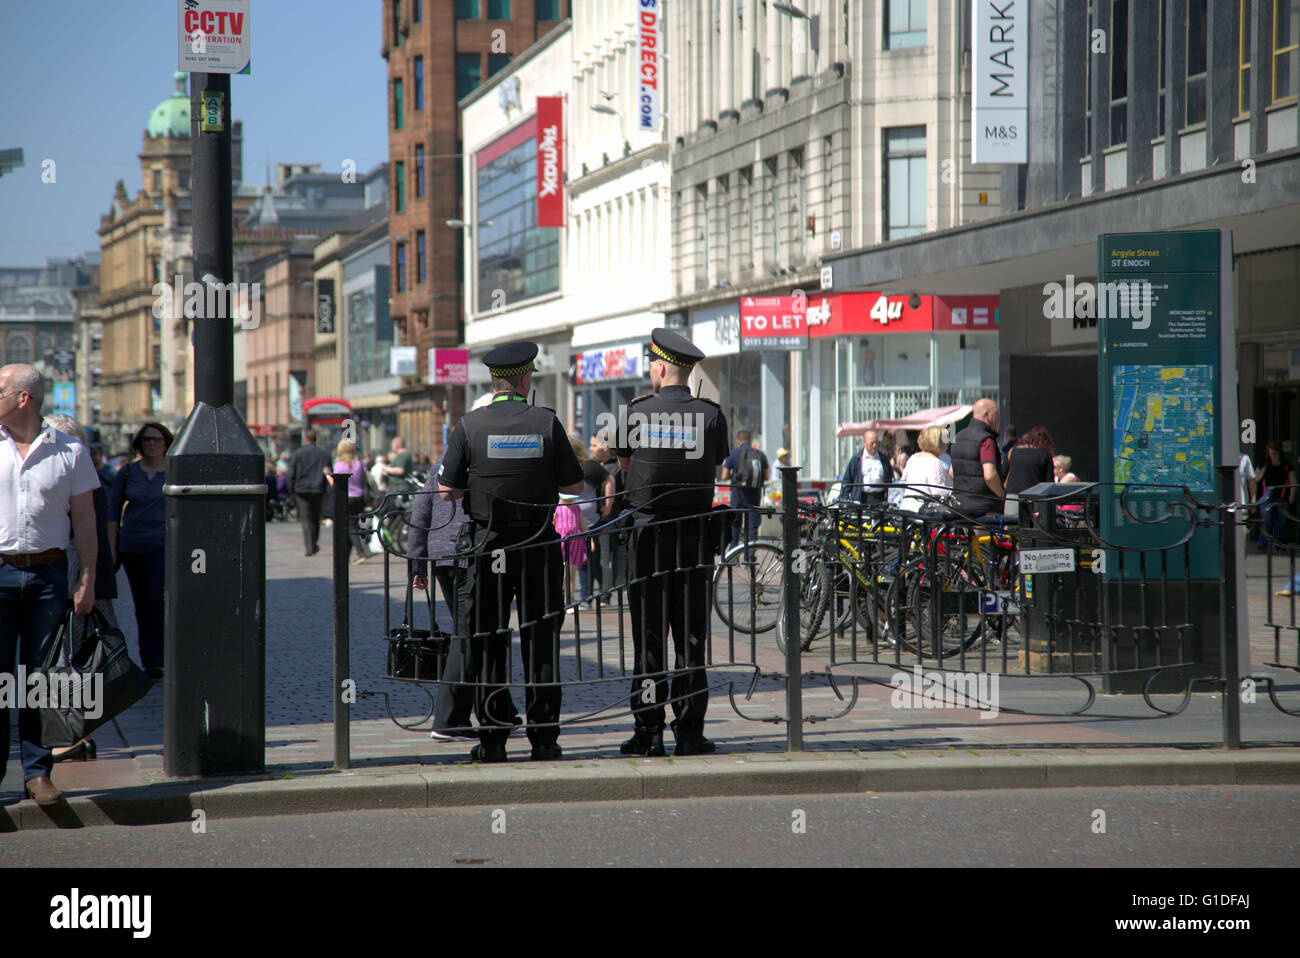 Community enforcement officers stopping littering on argyle street with cctv coverage sign, Glasgow,Scotland, UK. Stock Photo